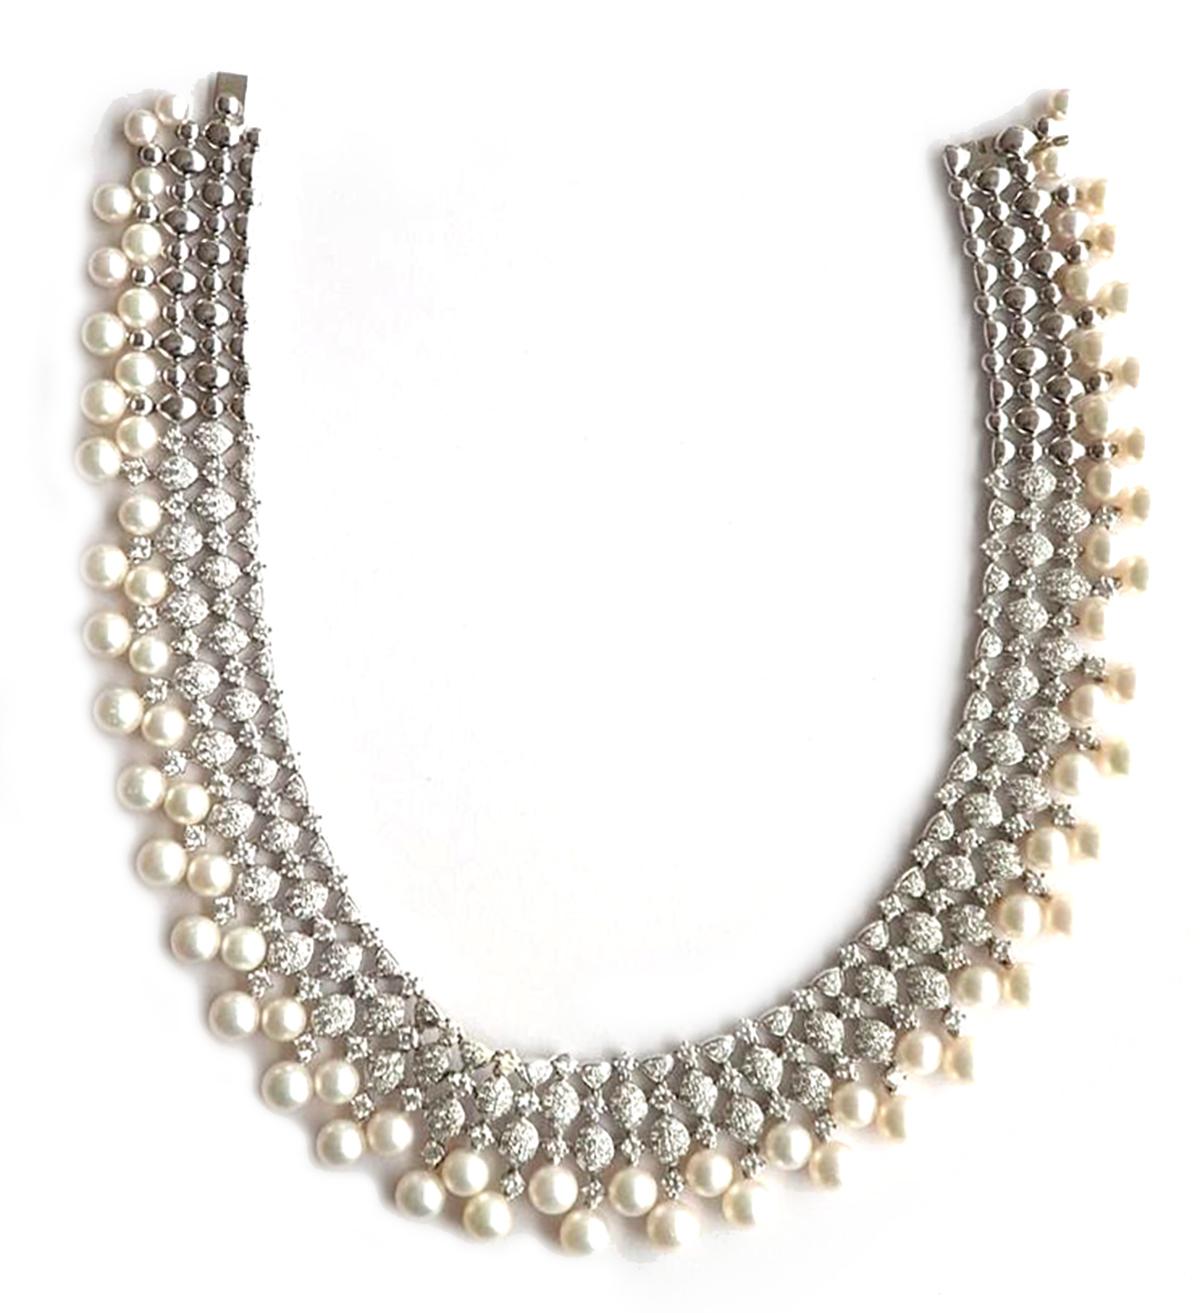 This Cultured Pearl & Diamond Necklace in 18K Gold is a luxurious and stunning piece of jewelry that features a unique and intricate design of pearls and diamonds. The pearls are of high quality and are cultured, giving them a beautiful and